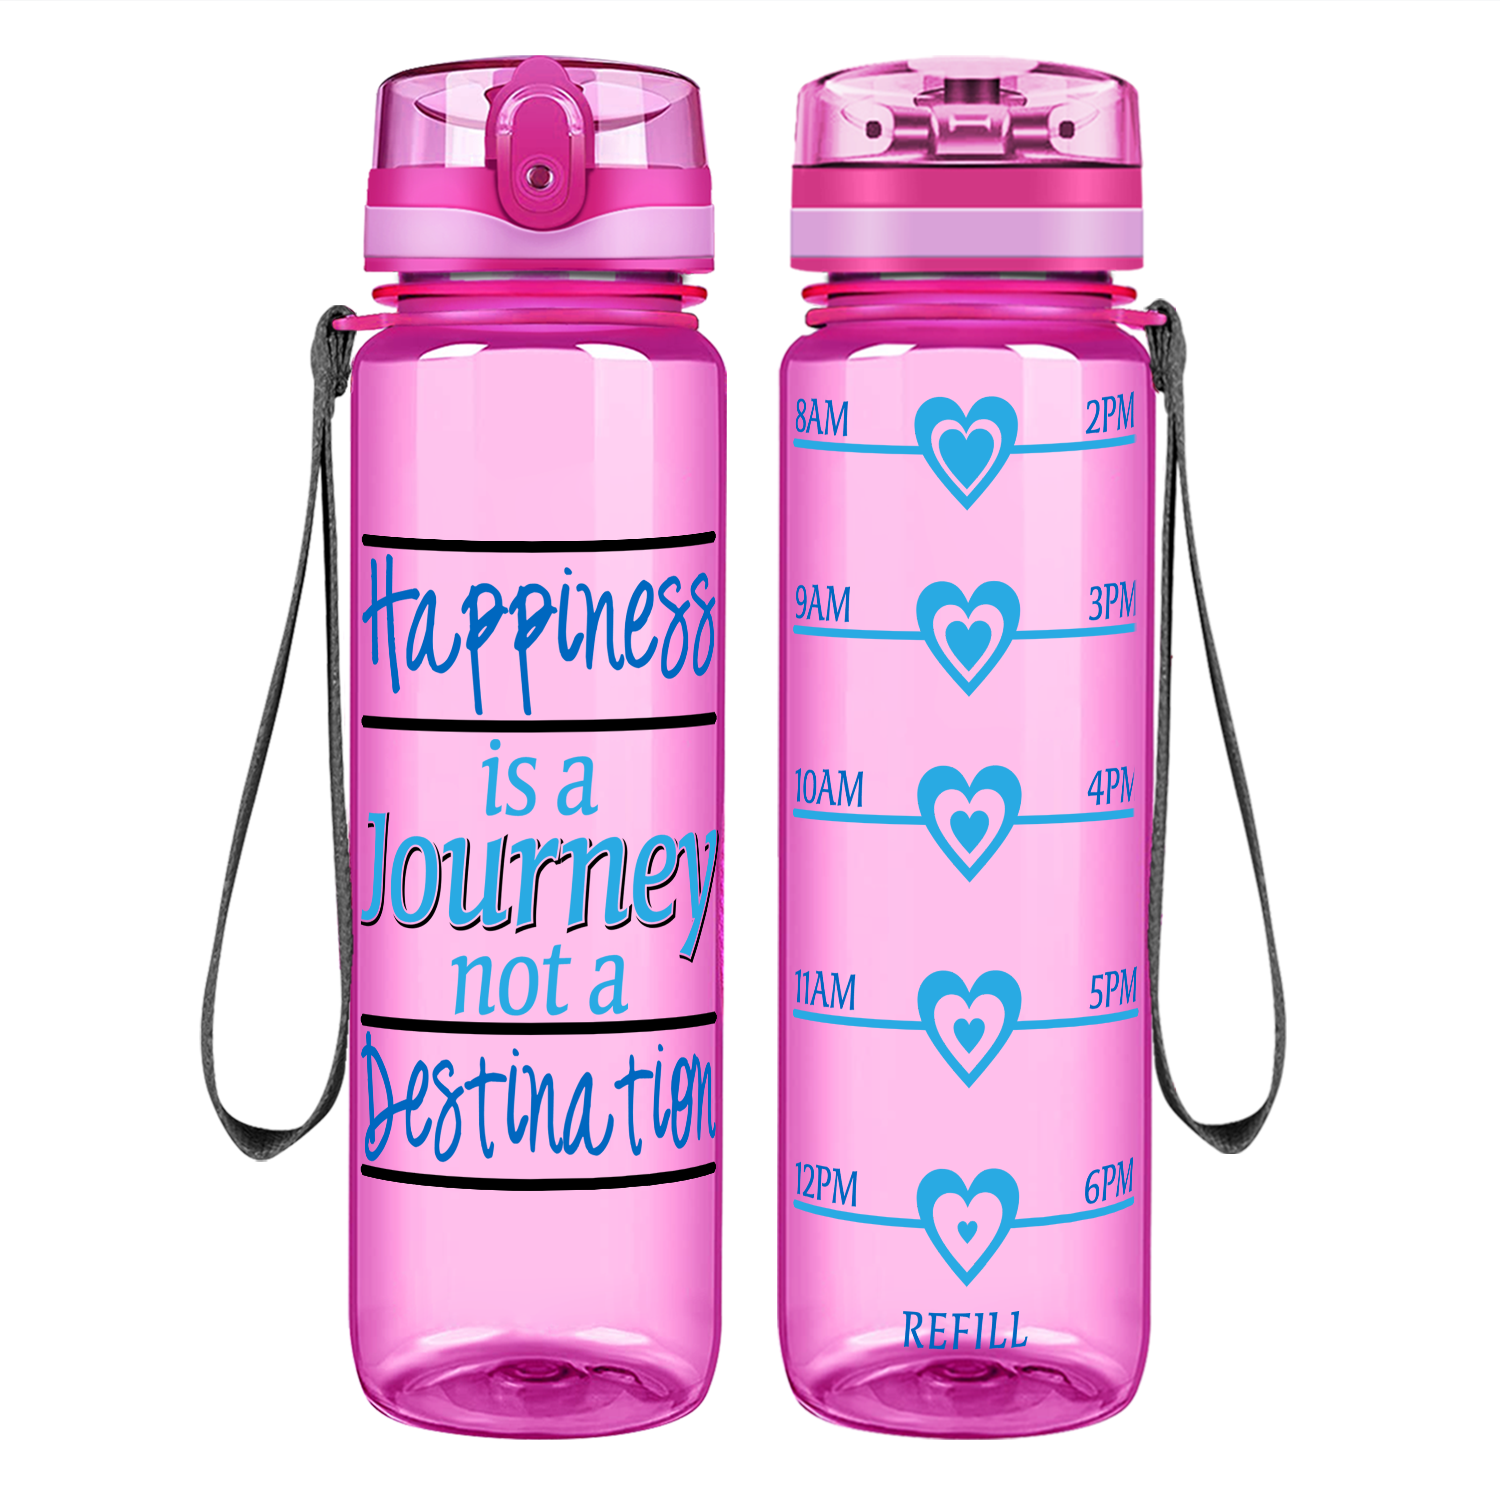 Destination Happiness on 32 oz Motivational Tracking Water Bottle